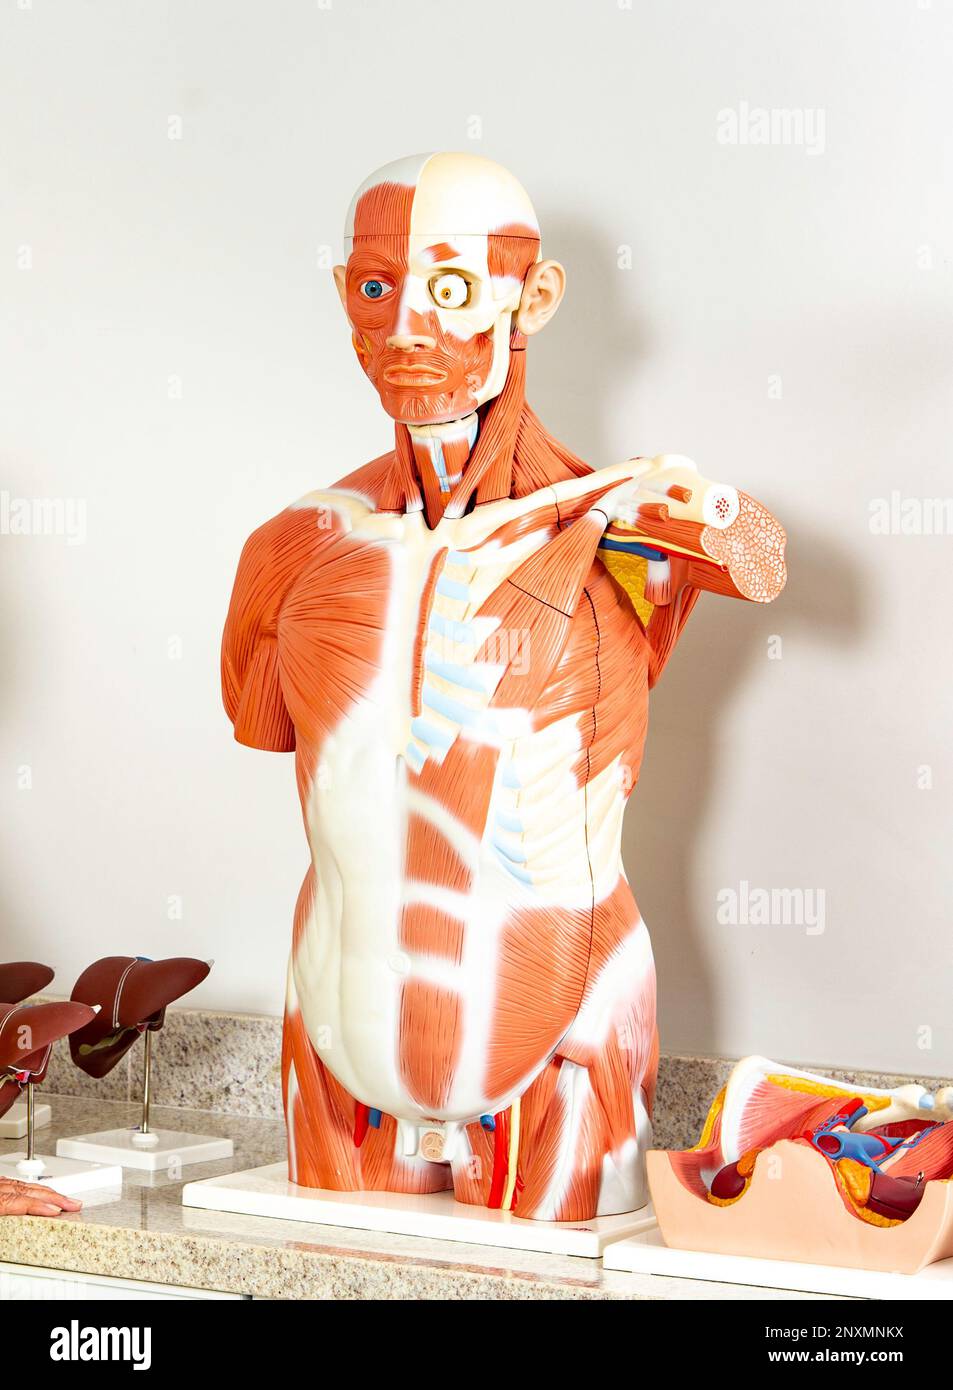 Human body, Anatomical mannequin, muscular system Stock Photo